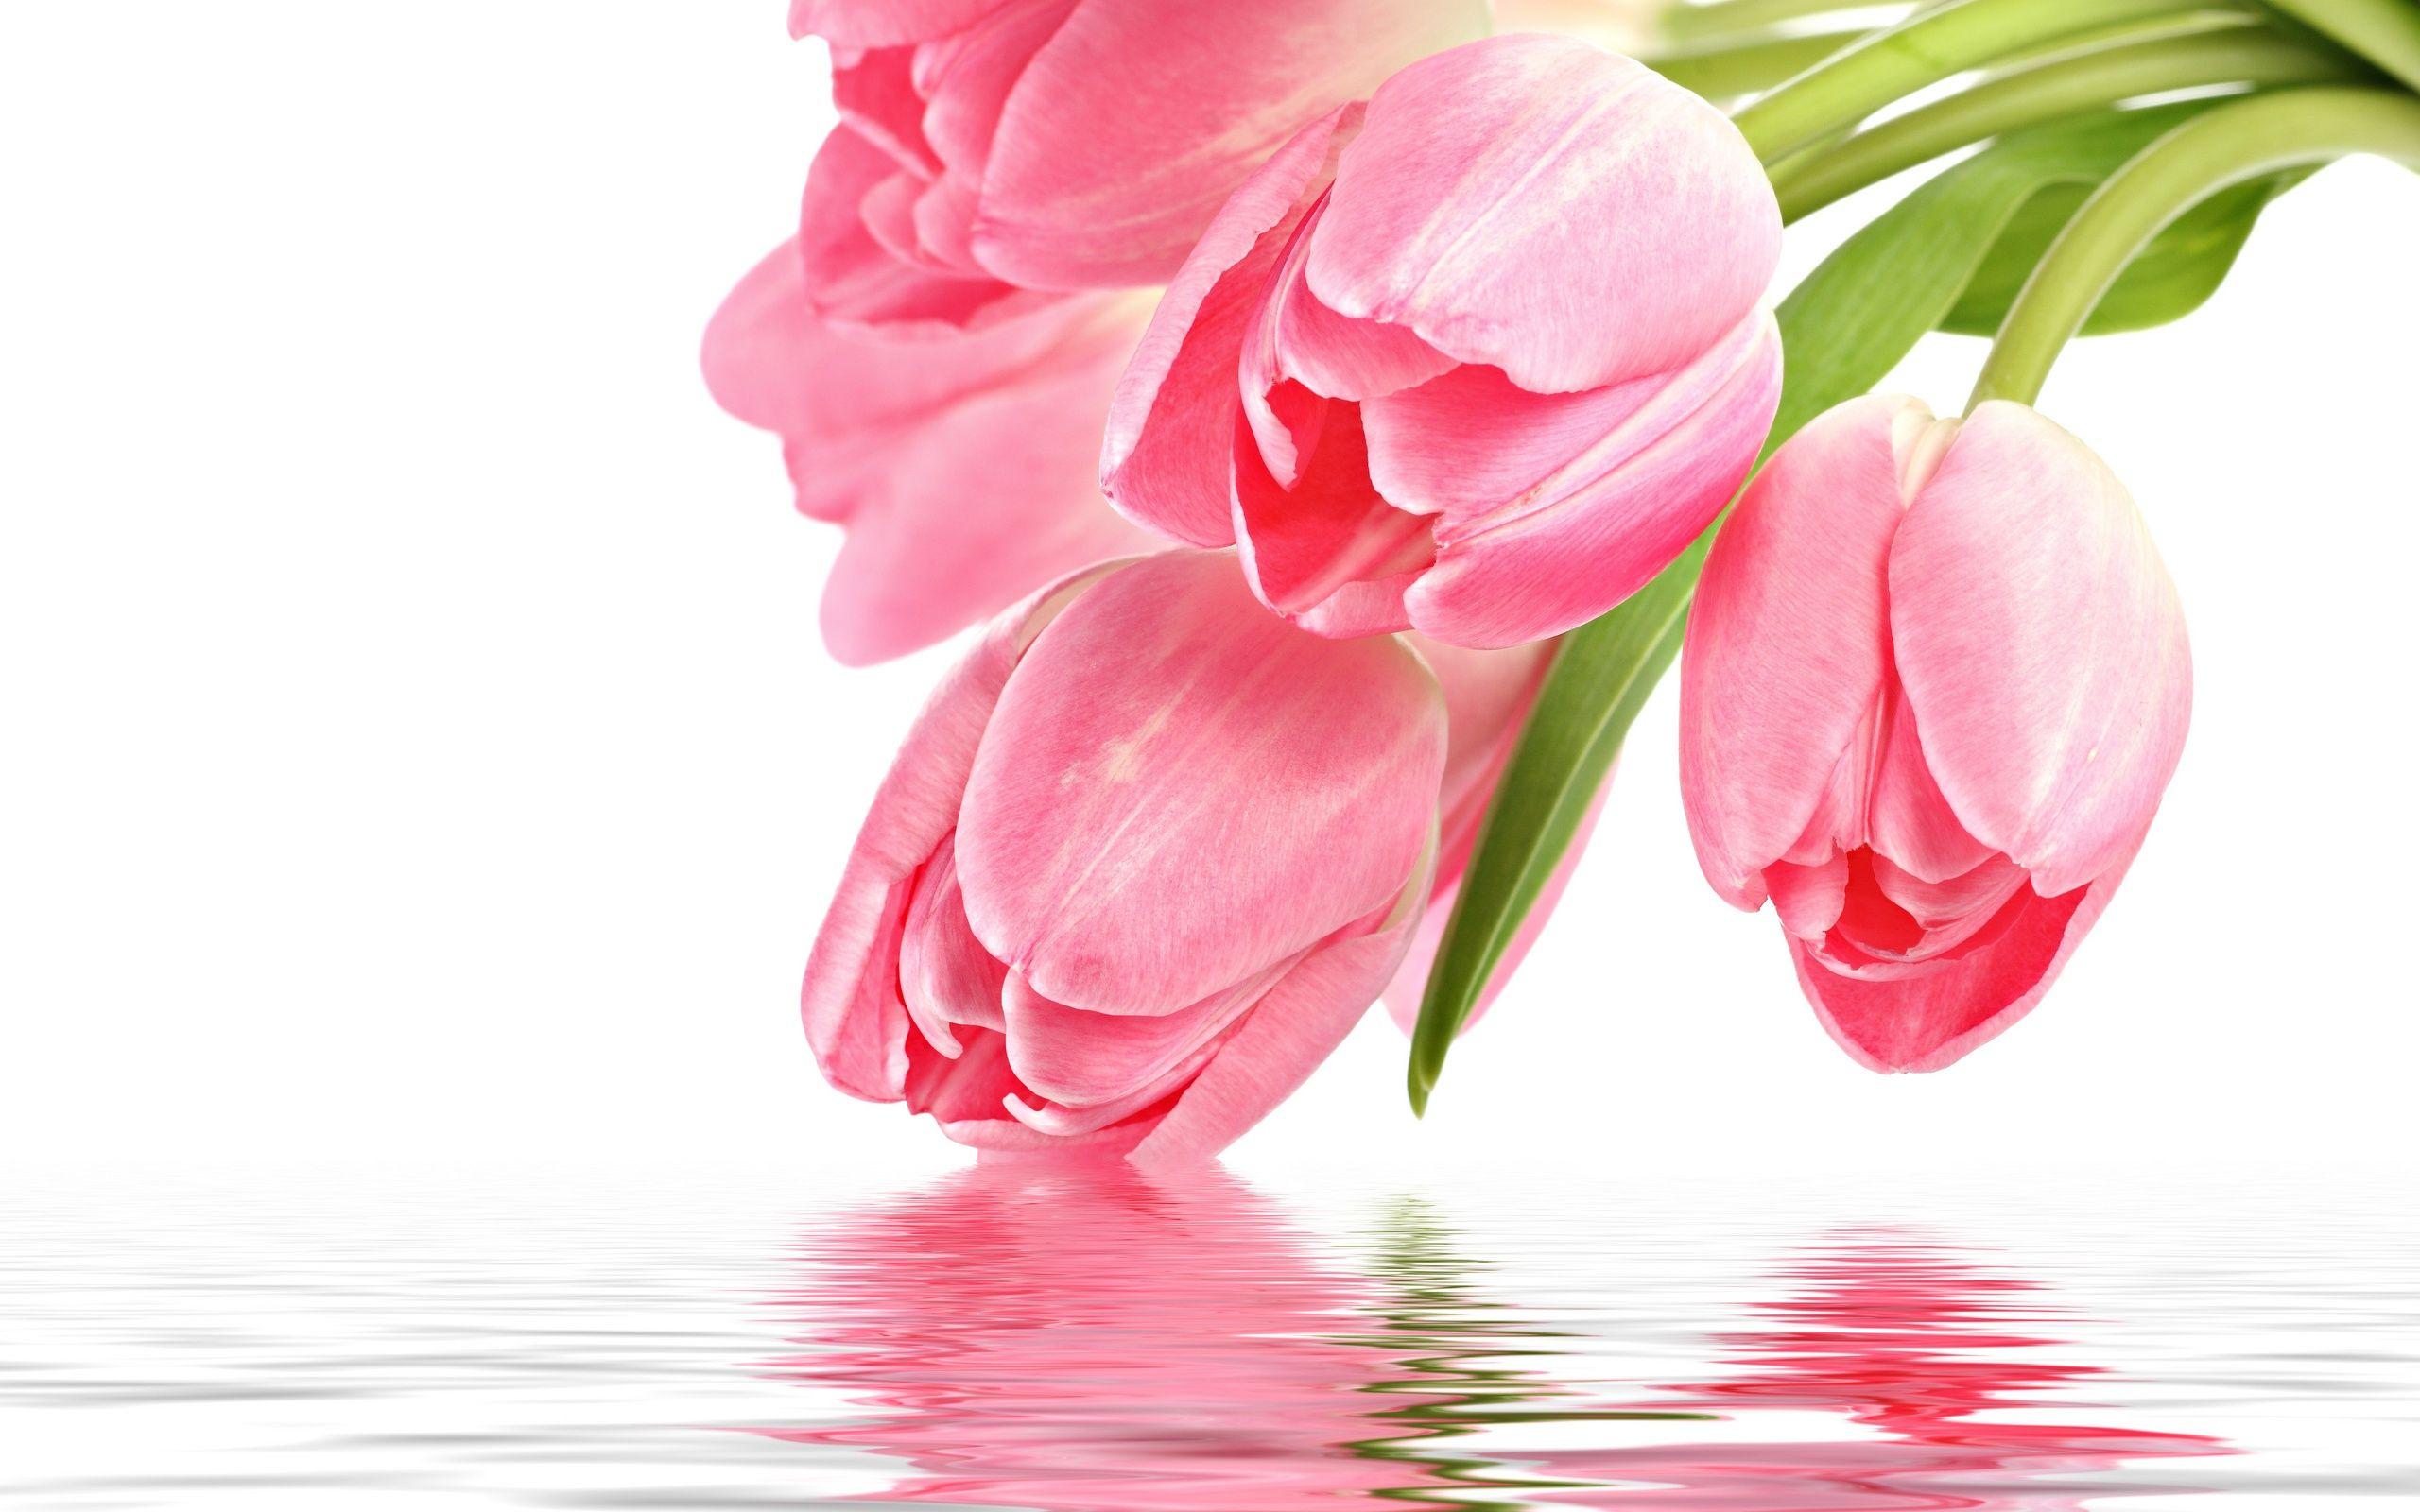 Awesome Pink Tulips HD Wallpaper Free Download